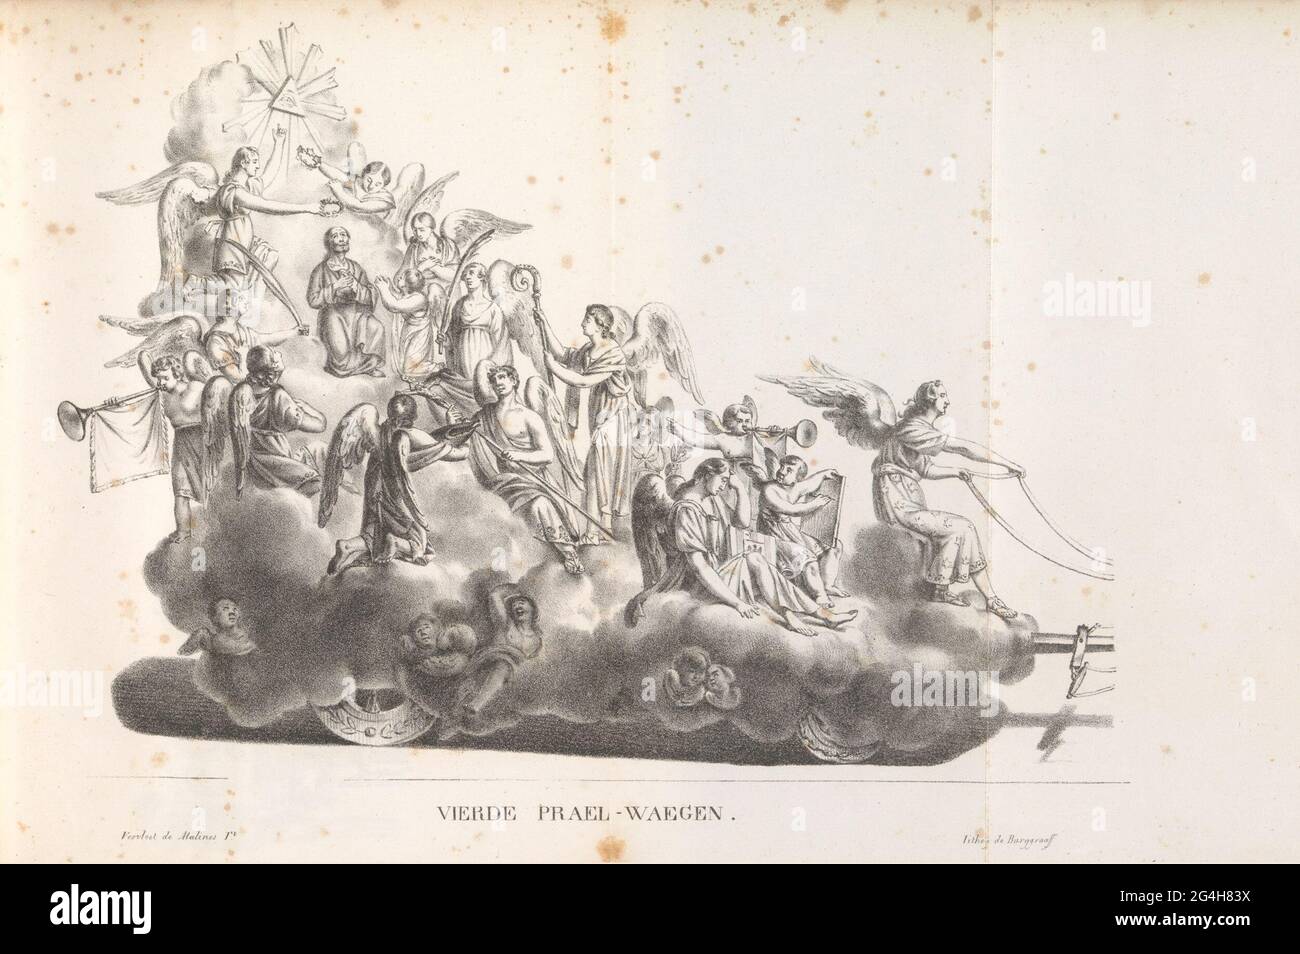 Fourth float in the procession for the Holy Rombout, 1825; Fourth Prael-Waegen. The fourth float in the conversation for the Holy Rombout. On the wagon the blessing rombout amid angels. The procession was held on June 28, 5 and 12, 1825. Illustration in a publication on the occasion of the 50-year celebration in 1825 of the Jubilee of the Saint Rumold or Rombout, patron saint of the city of Mechelen. Stock Photo